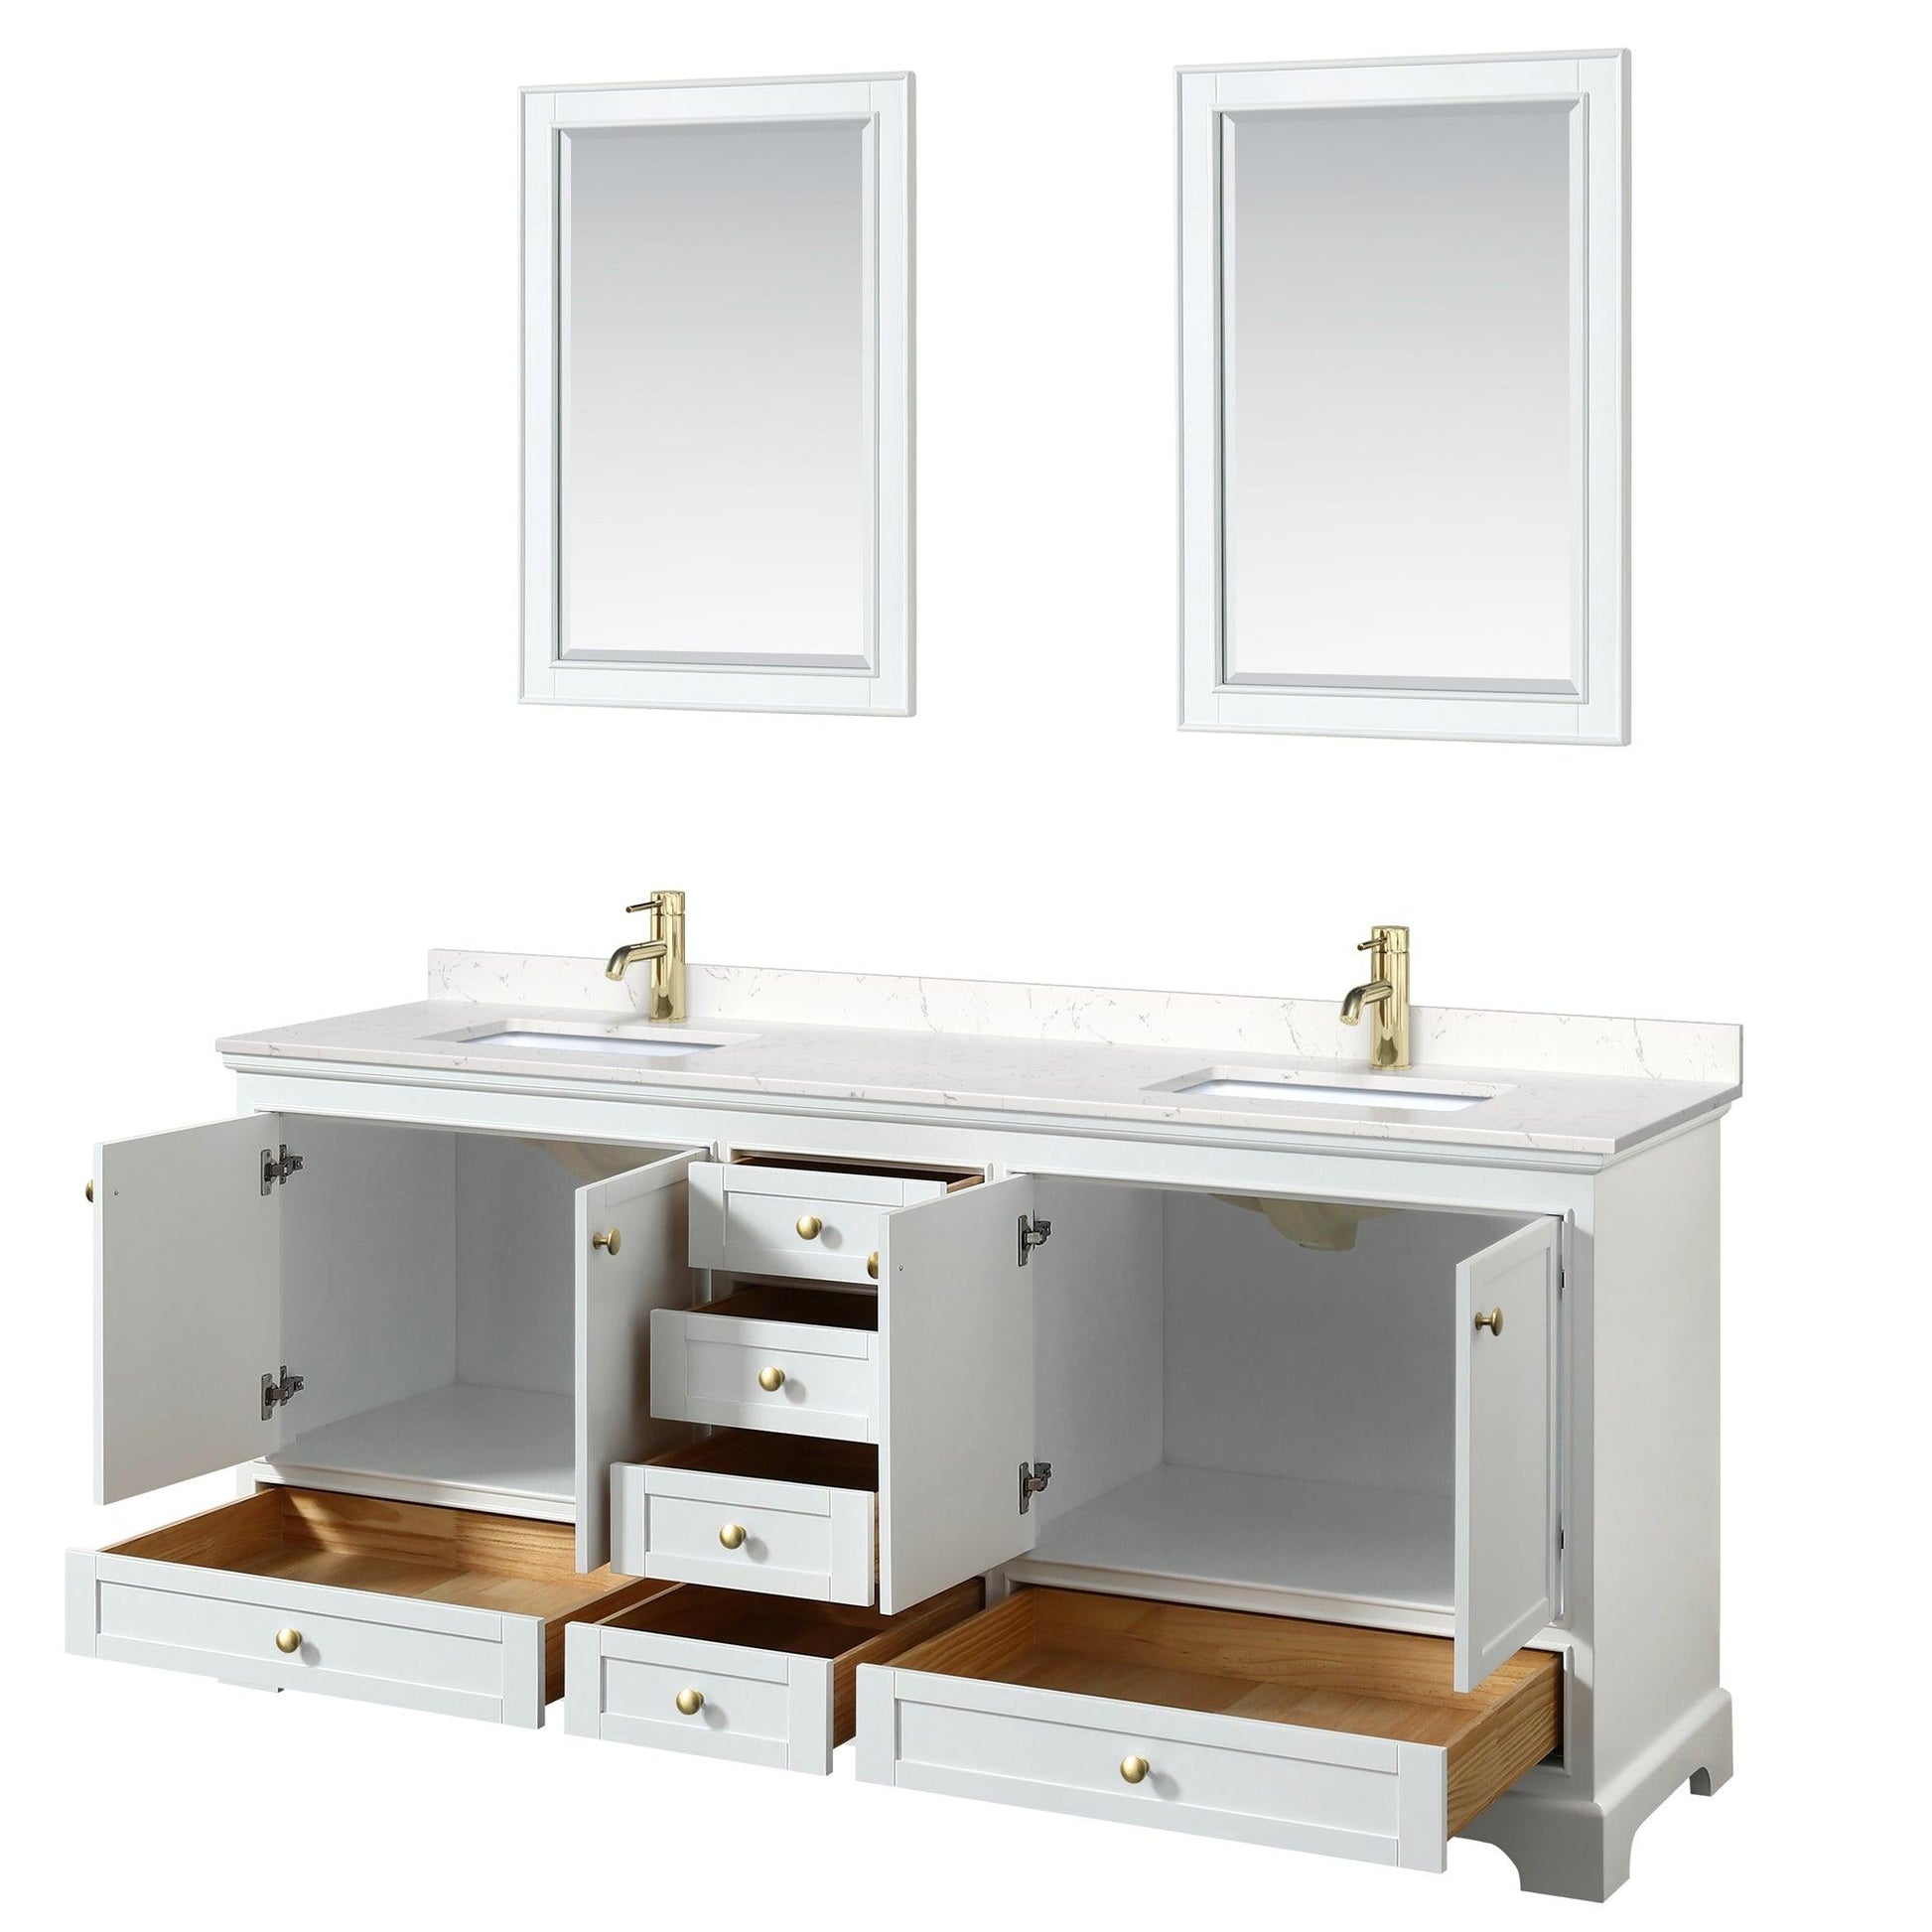 
  
  Wyndham Collection Deborah Double Bathroom Vanity in White, Carrara Cultured Marble Countertop, Undermount Square Sinks, Brushed Gold Trim, Optional 24 Inch Mirrors/Medicine Cabinets
  
